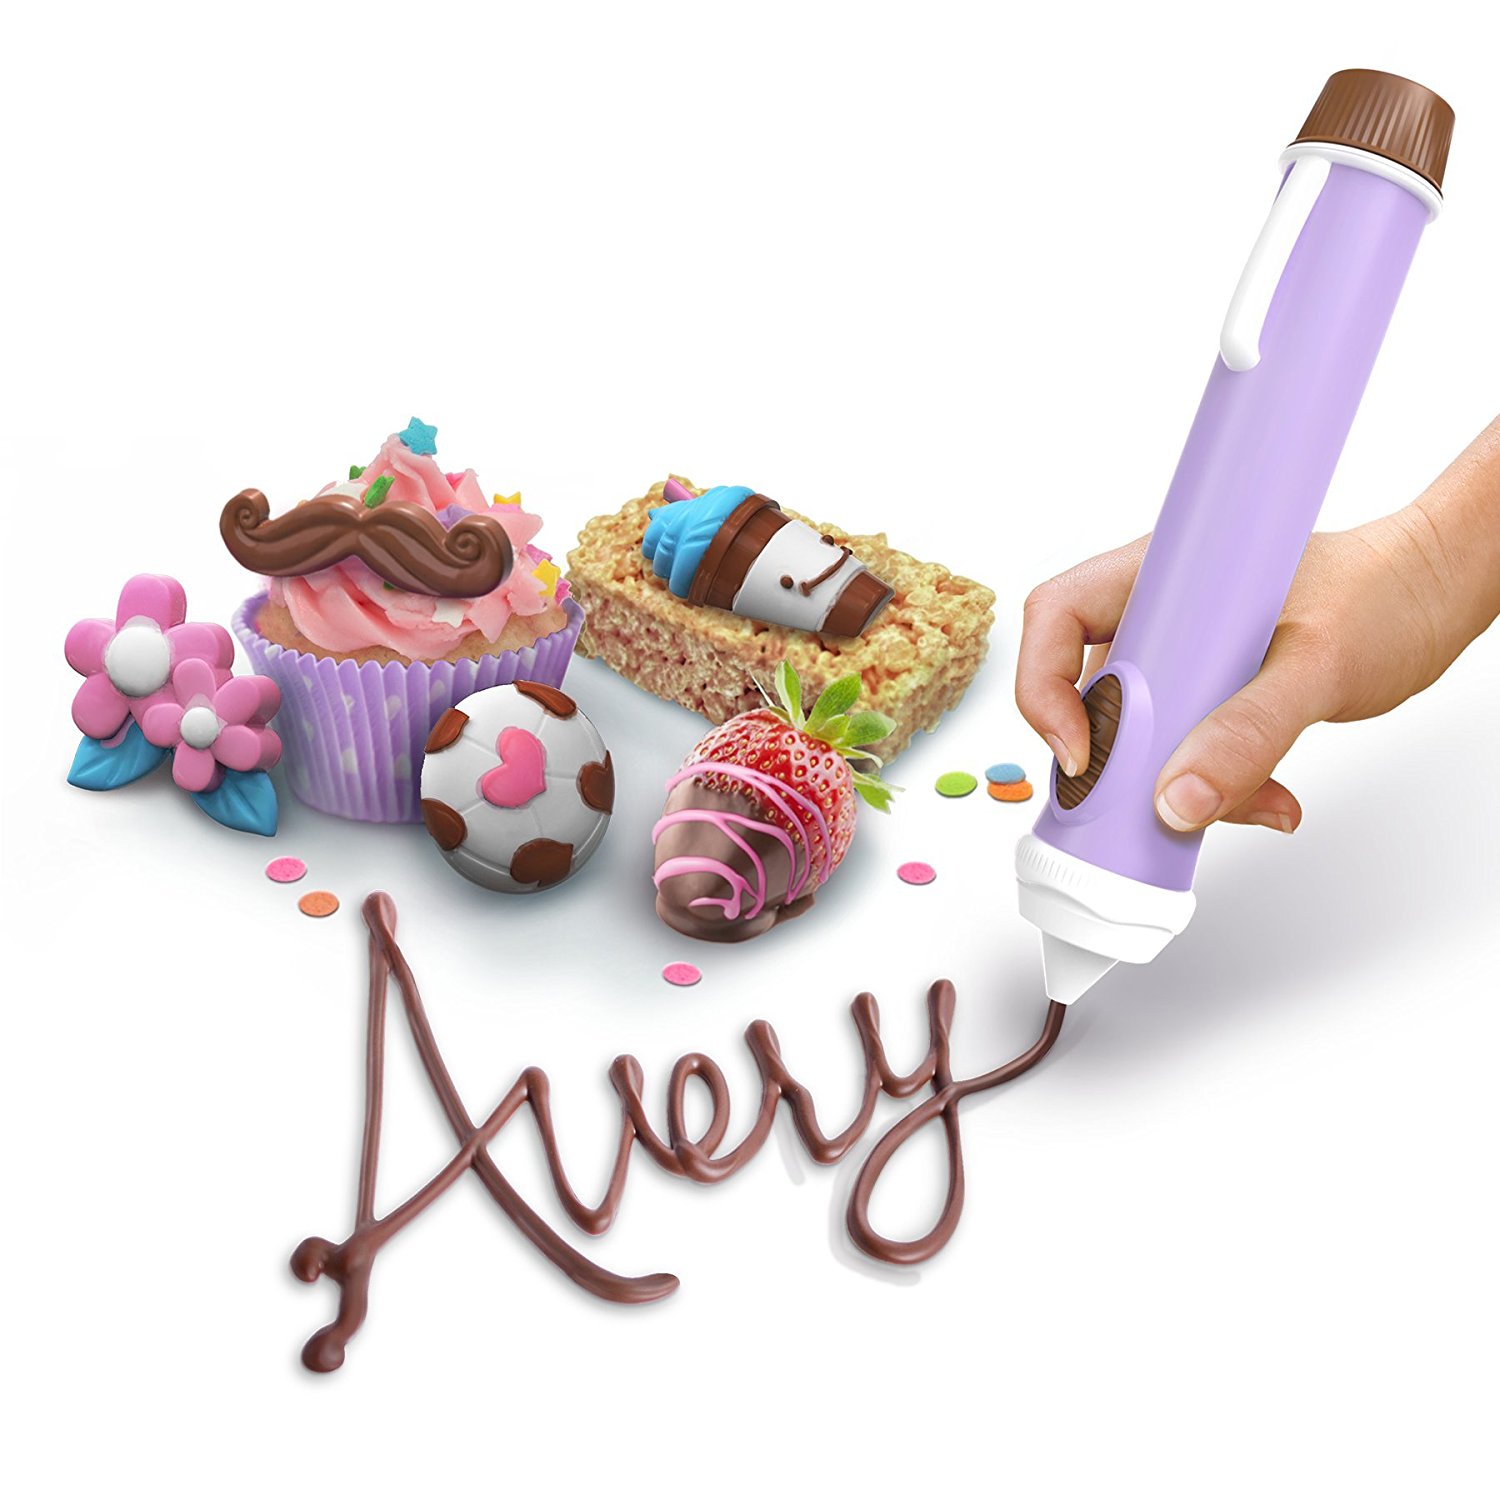 Real Cooking Chocolate Pen 2 Kit – Includes 4 Chocolate Refills – Just $11.79!